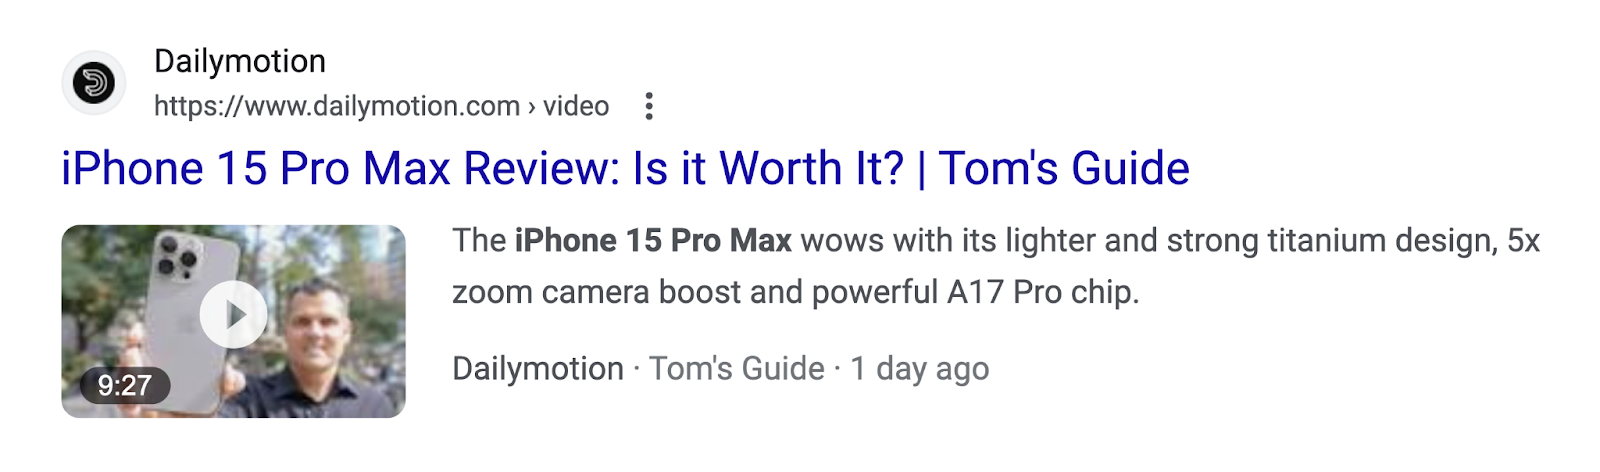 A video’s title from Dailymotion on SERP, that reads "iPhone 15 Pro Max Review: Is it Worth it? | Tom's Guide"